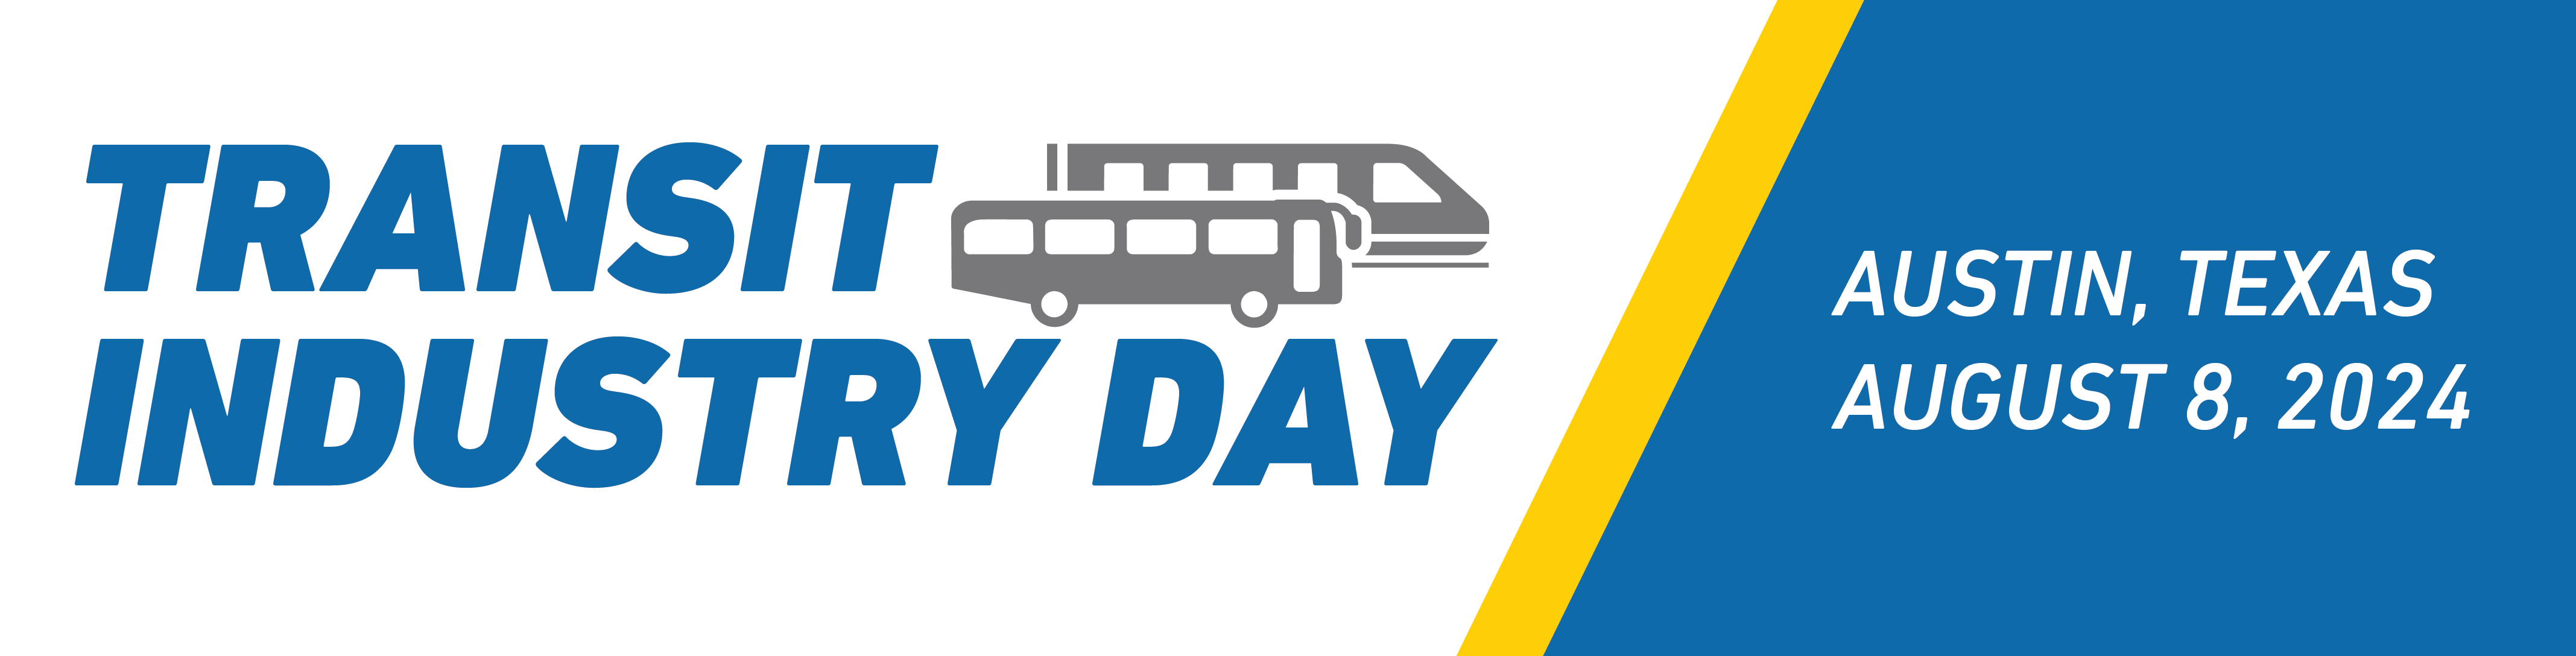 Transit Industry Day 2024 with CapMetro